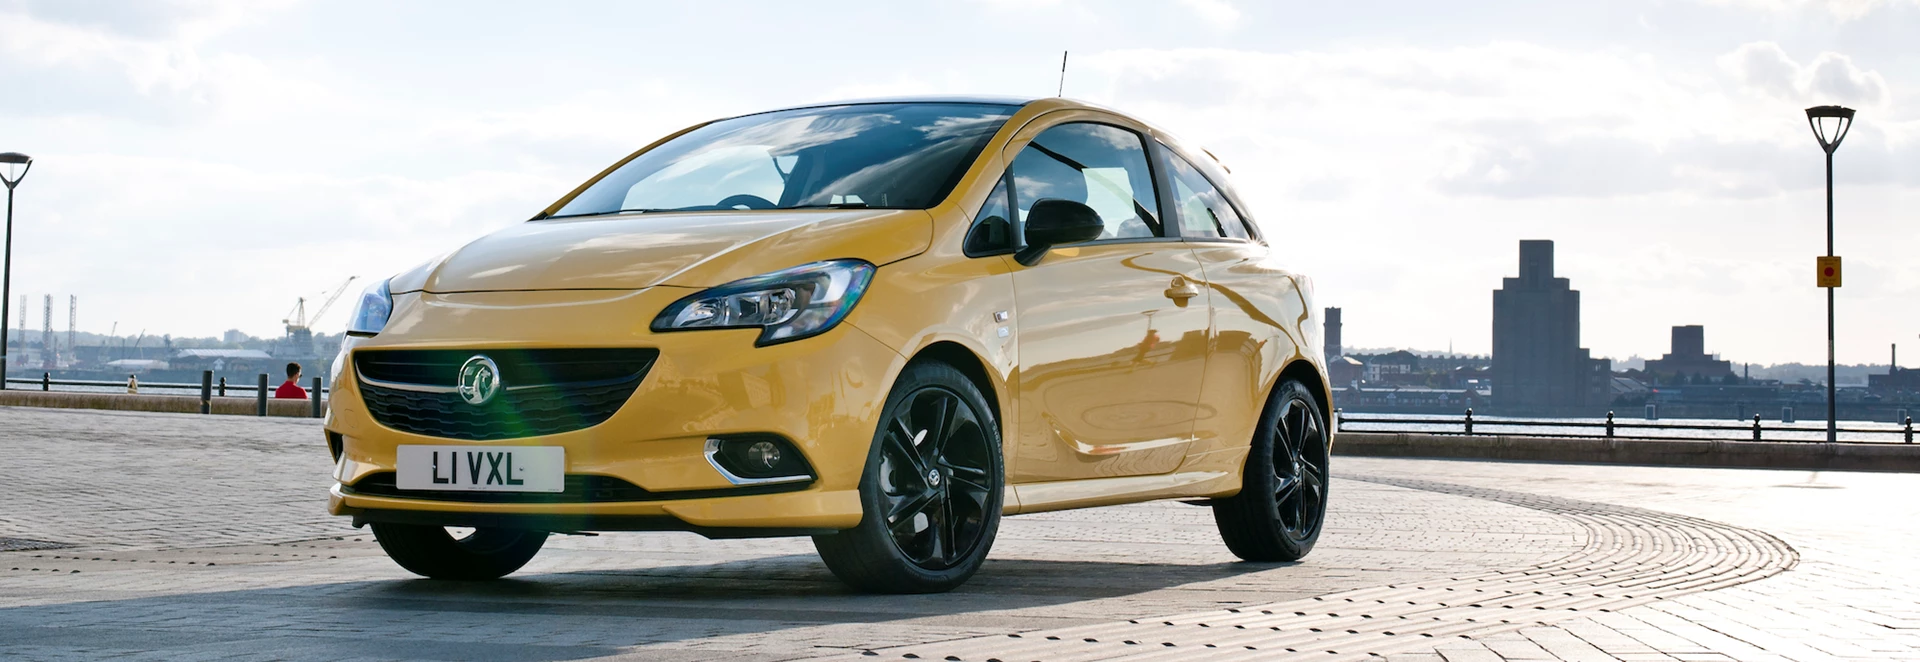 The New Vauxhall Corsa: all you need to know 